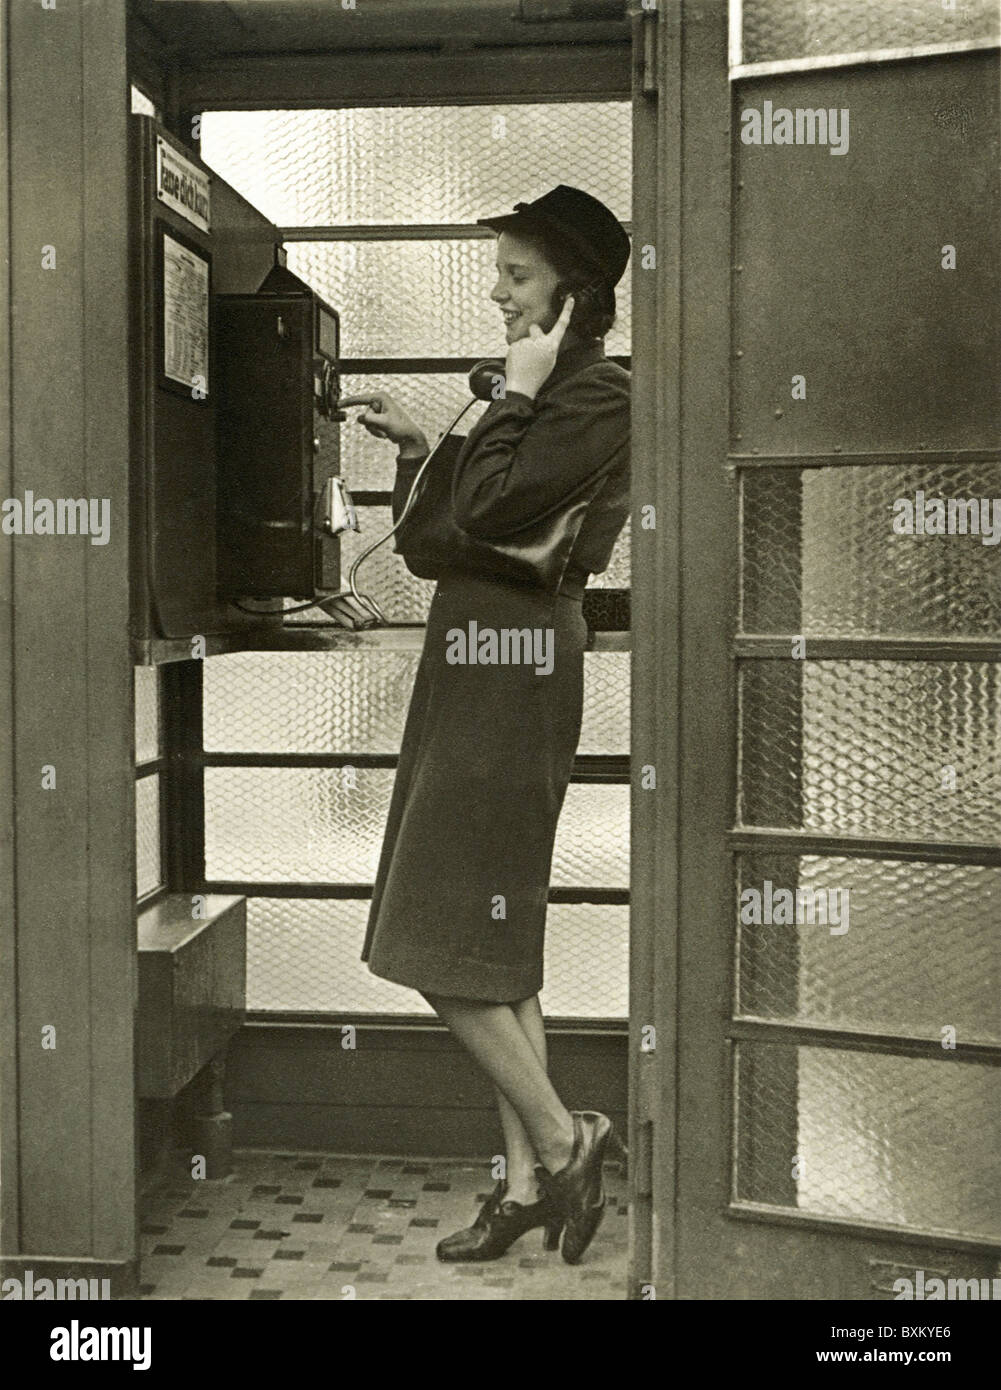 post / mail, telephone, woman in telephone box, Germany, circa 1940, Additional-Rights-Clearences-Not Available Stock Photo